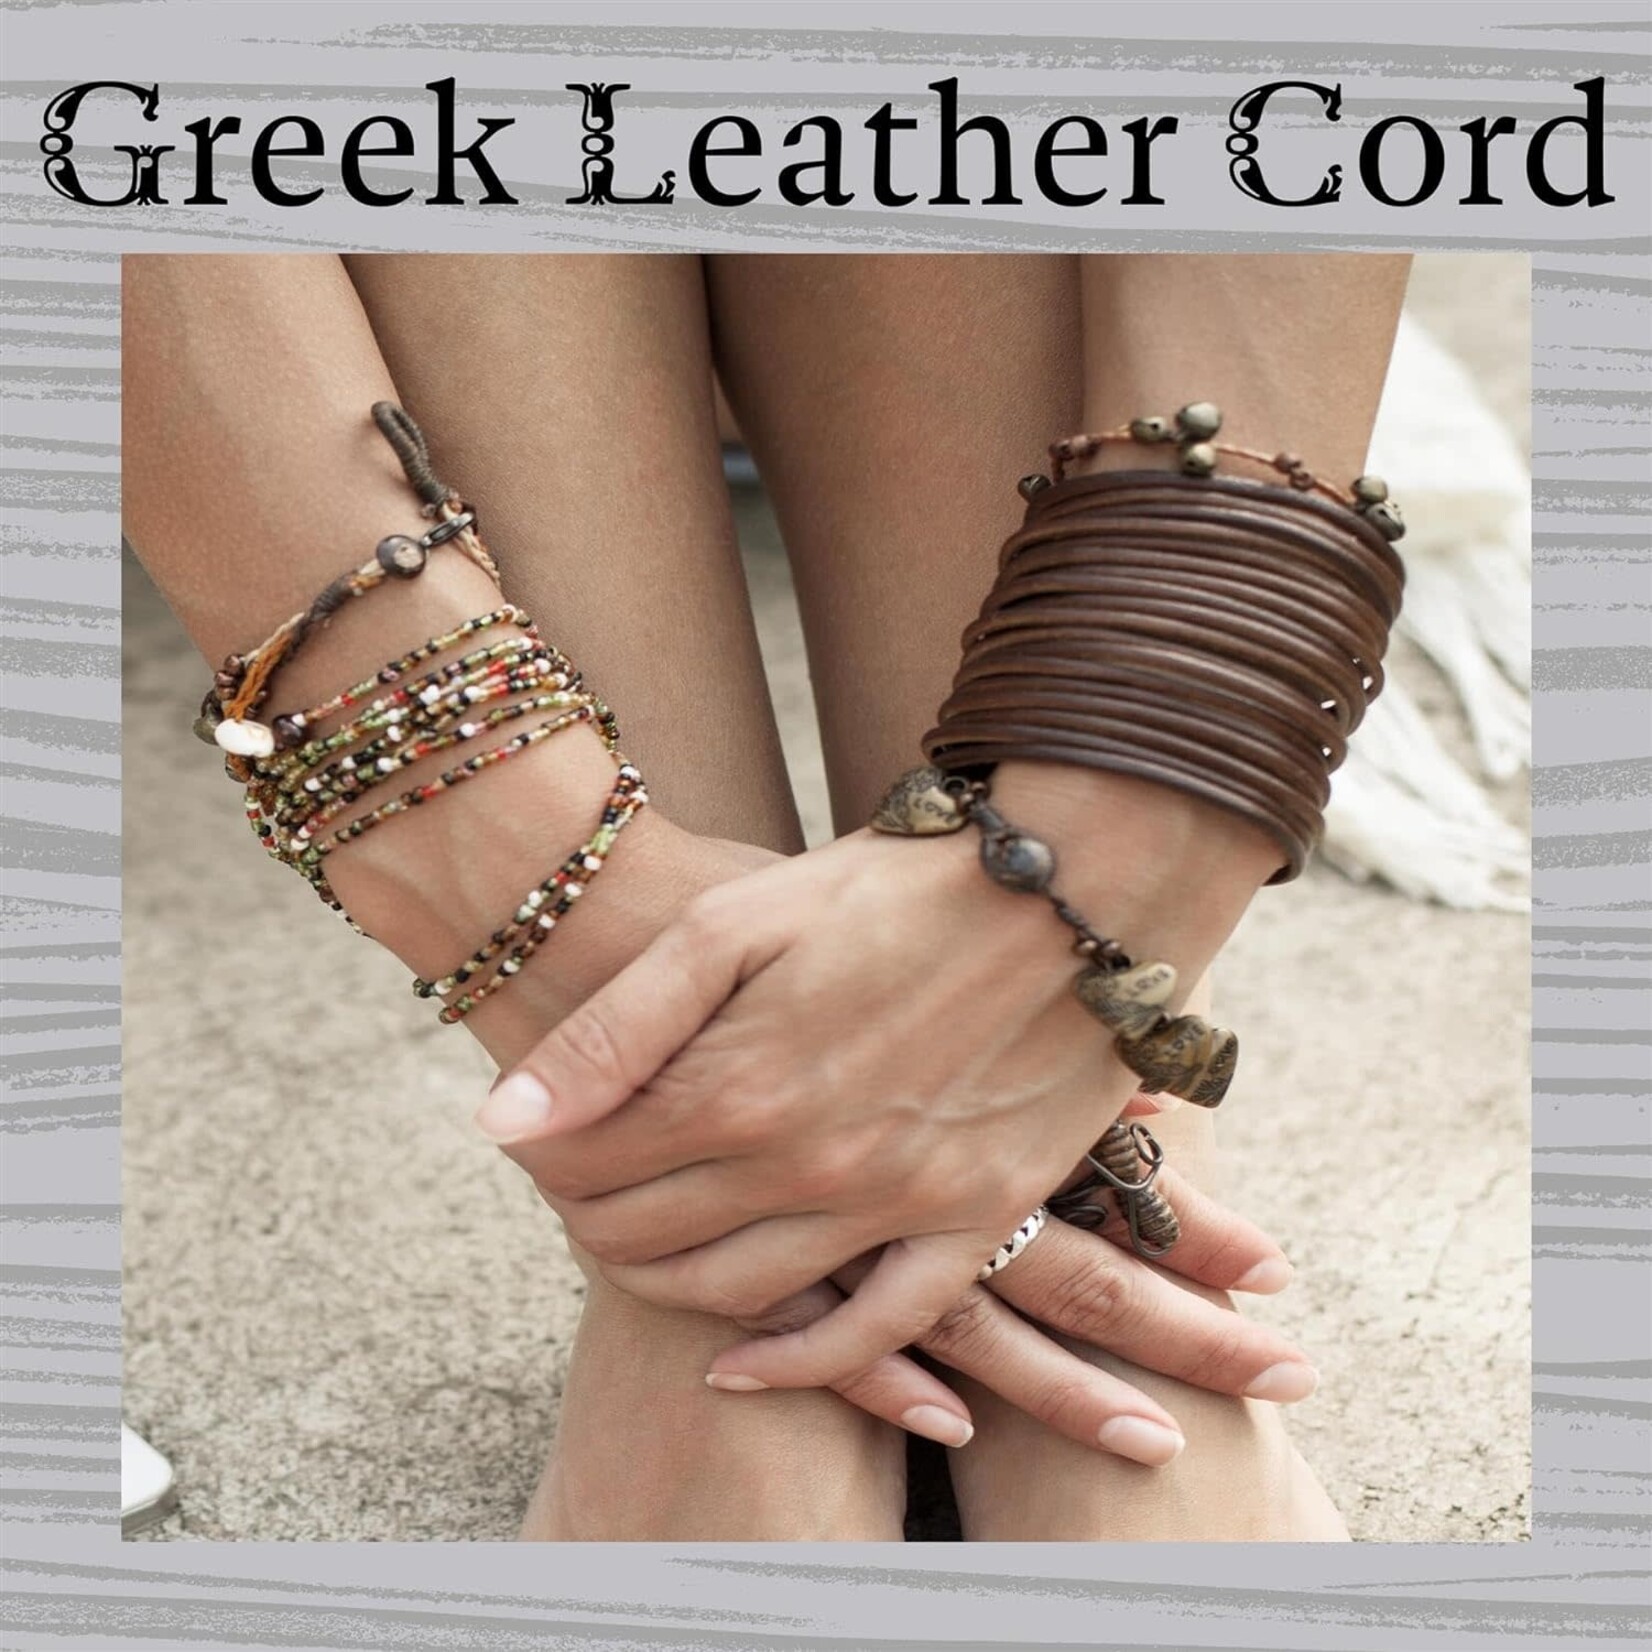 Leather 1.5mm Round Cord Brown (Greek) - 1 Foot